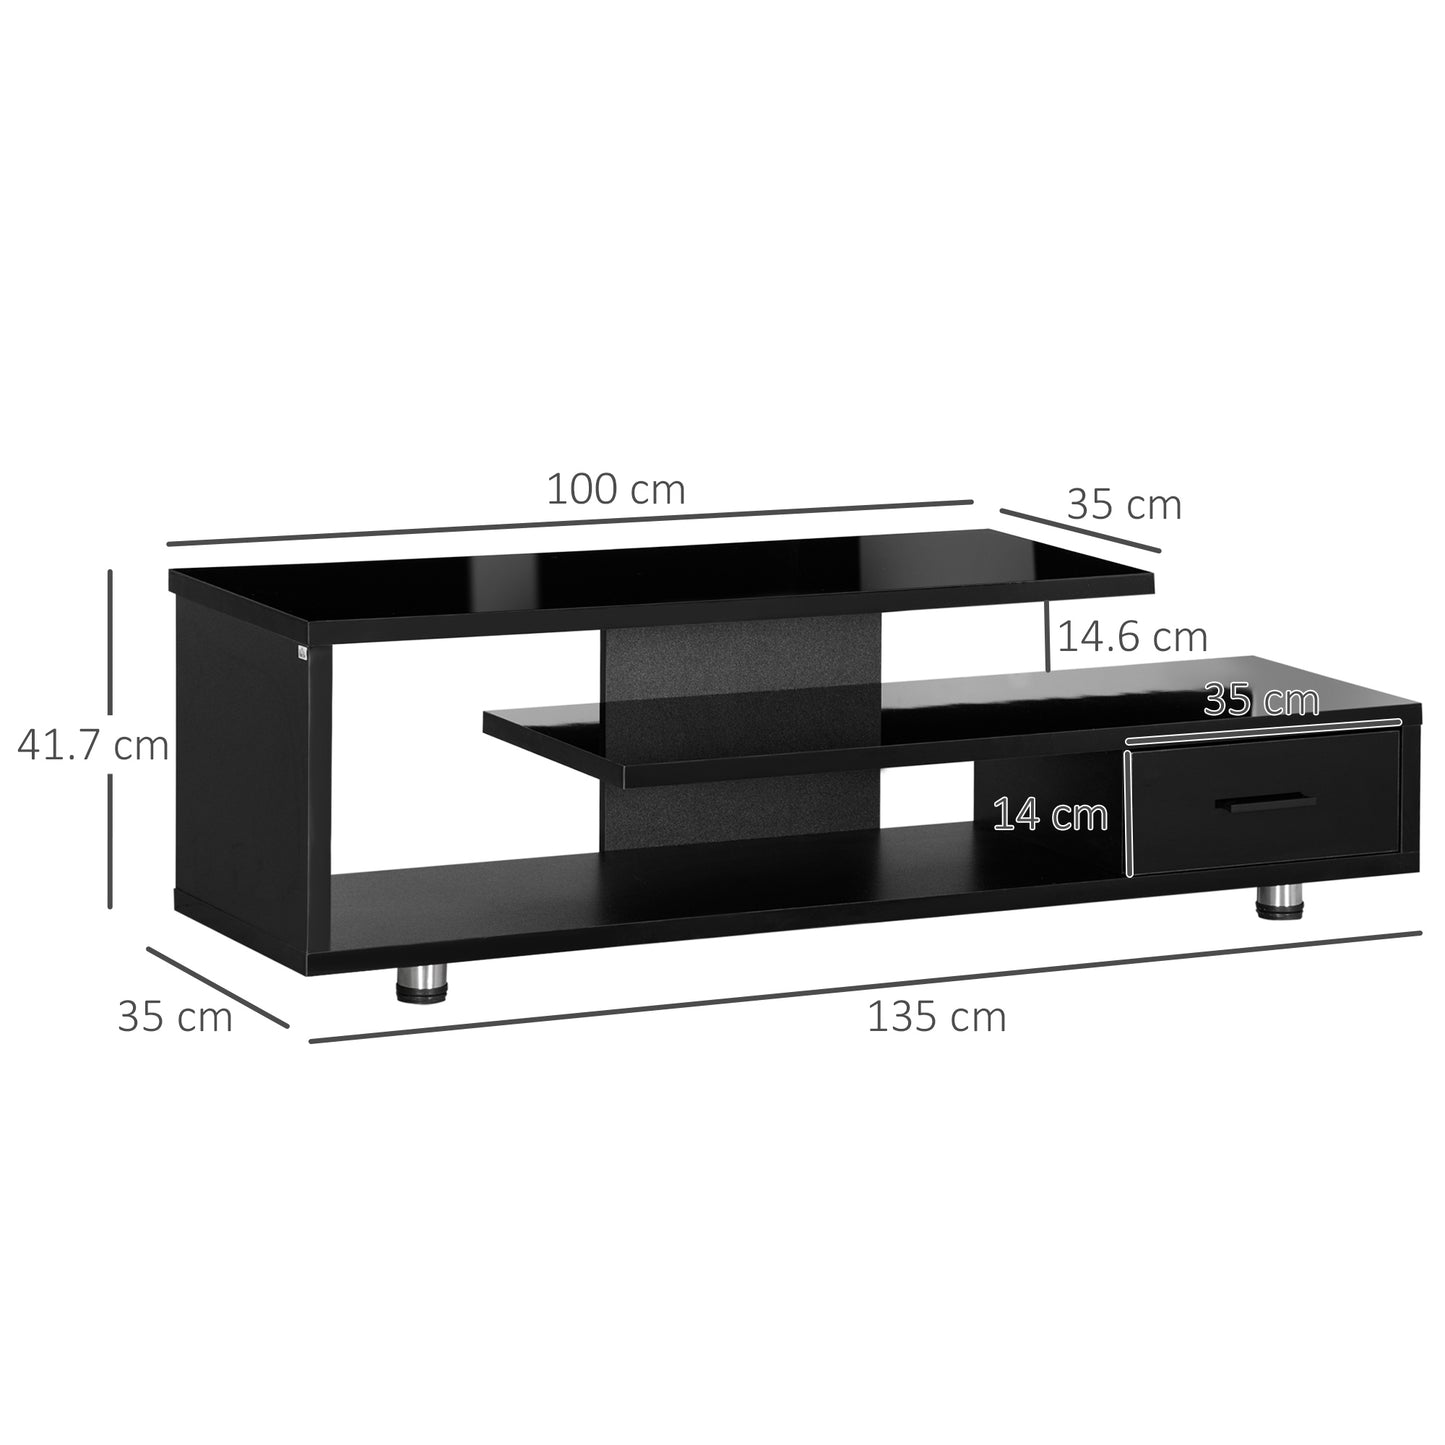 HOMCOM Modern TV Unit for TVs up to 65", TV Cabinet with Storage Shelf and Drawer, Entertainment Unit for Living Room Bedroom, High Gloss Black